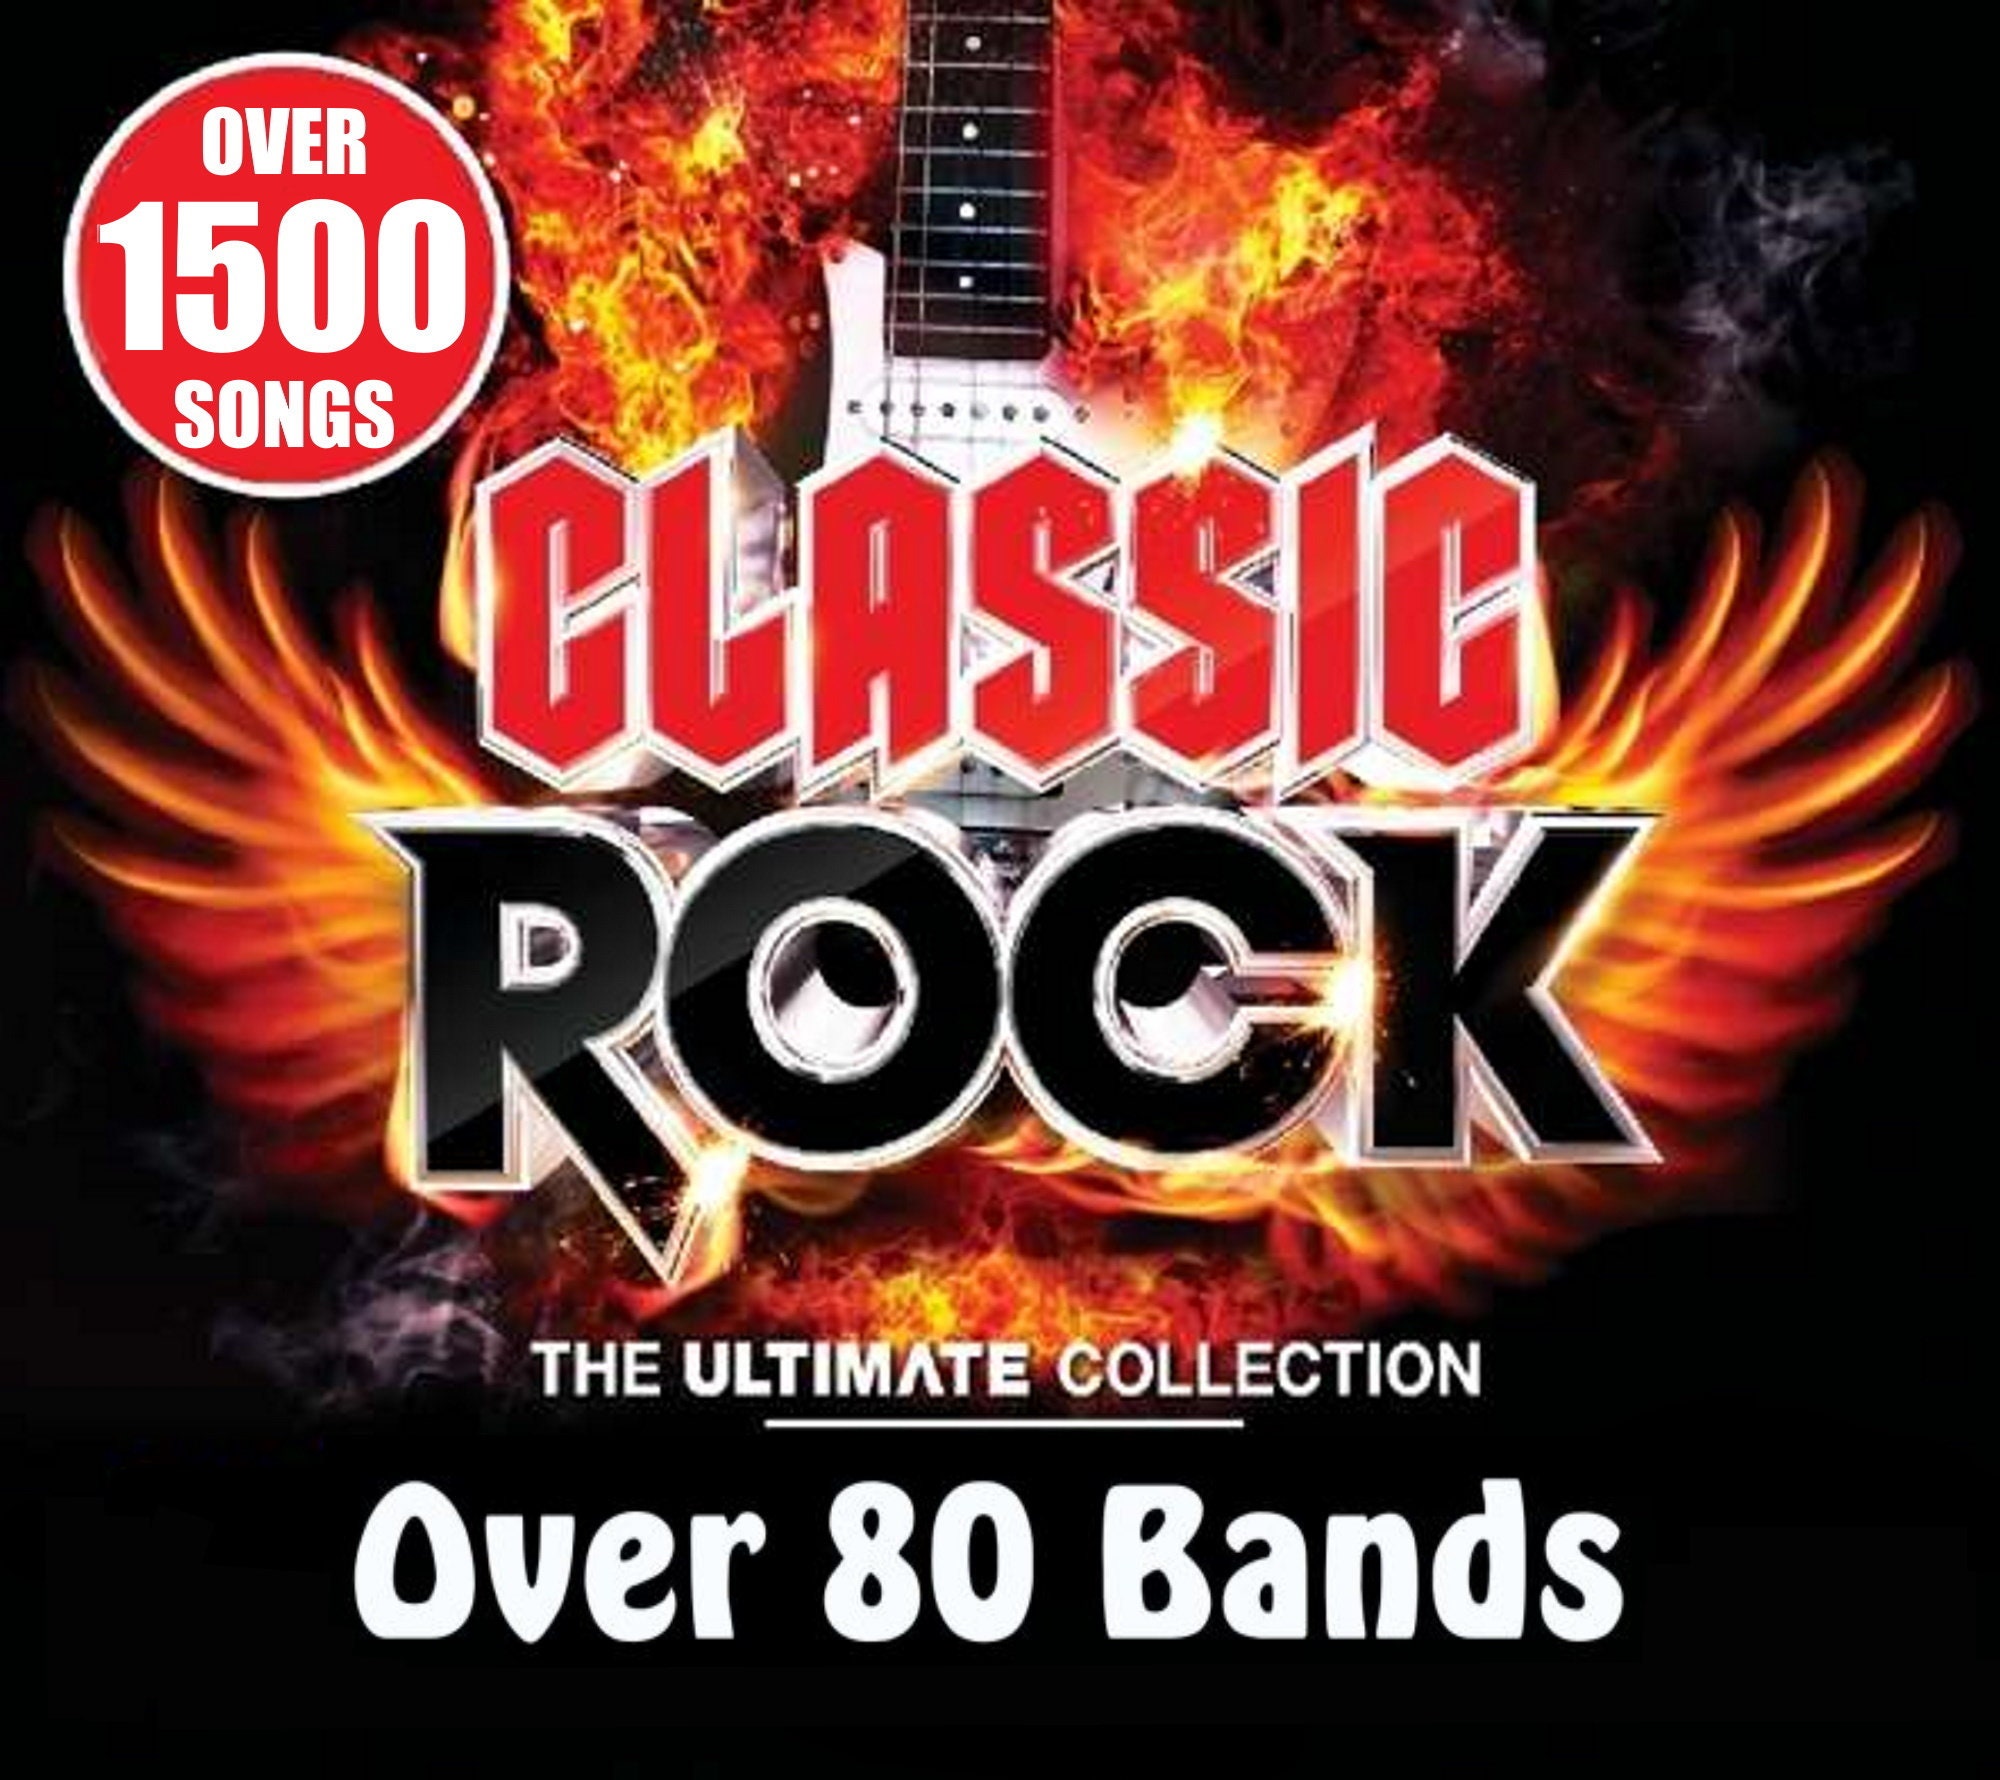 Static collection. Rock CD. #100 Hits Rock. Classic Rock. 5 Rocks.